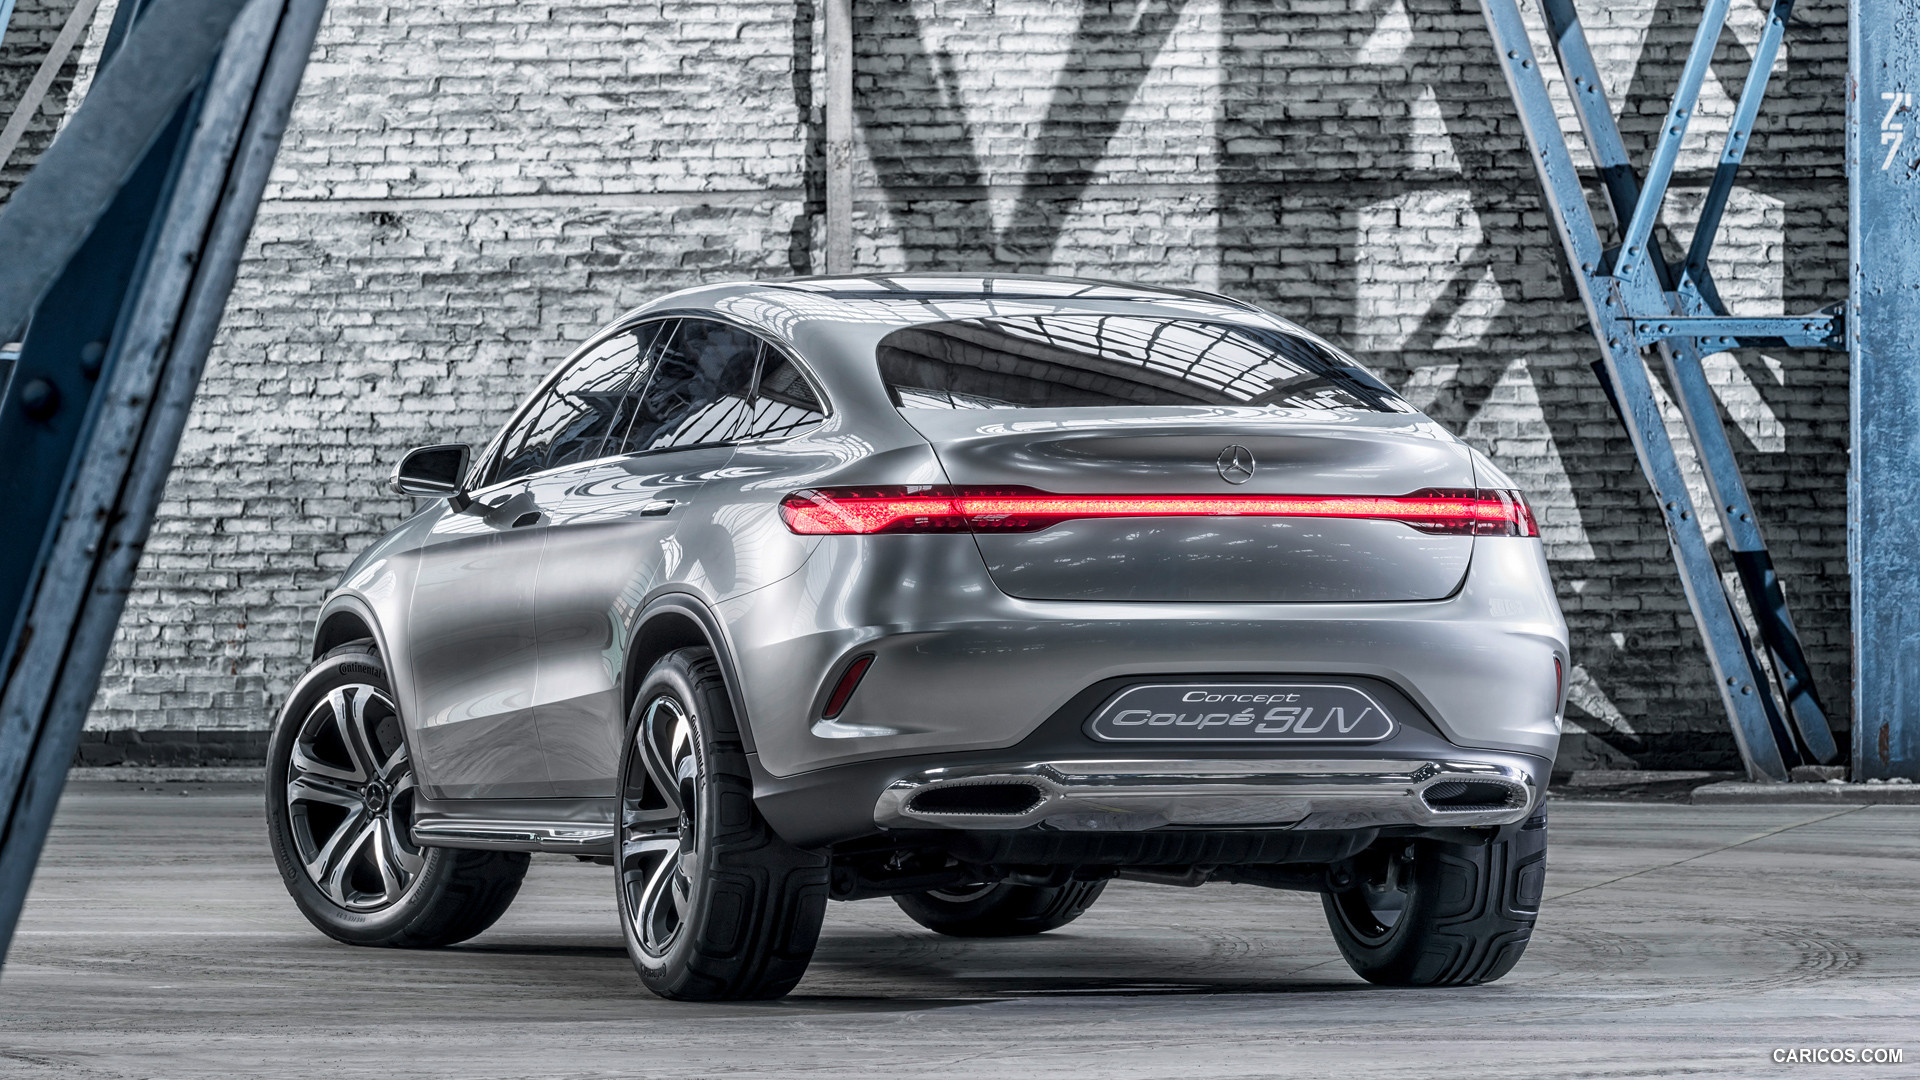 2014 Mercedes-Benz Coupe SUV Concept  - Rear, #5 of 17